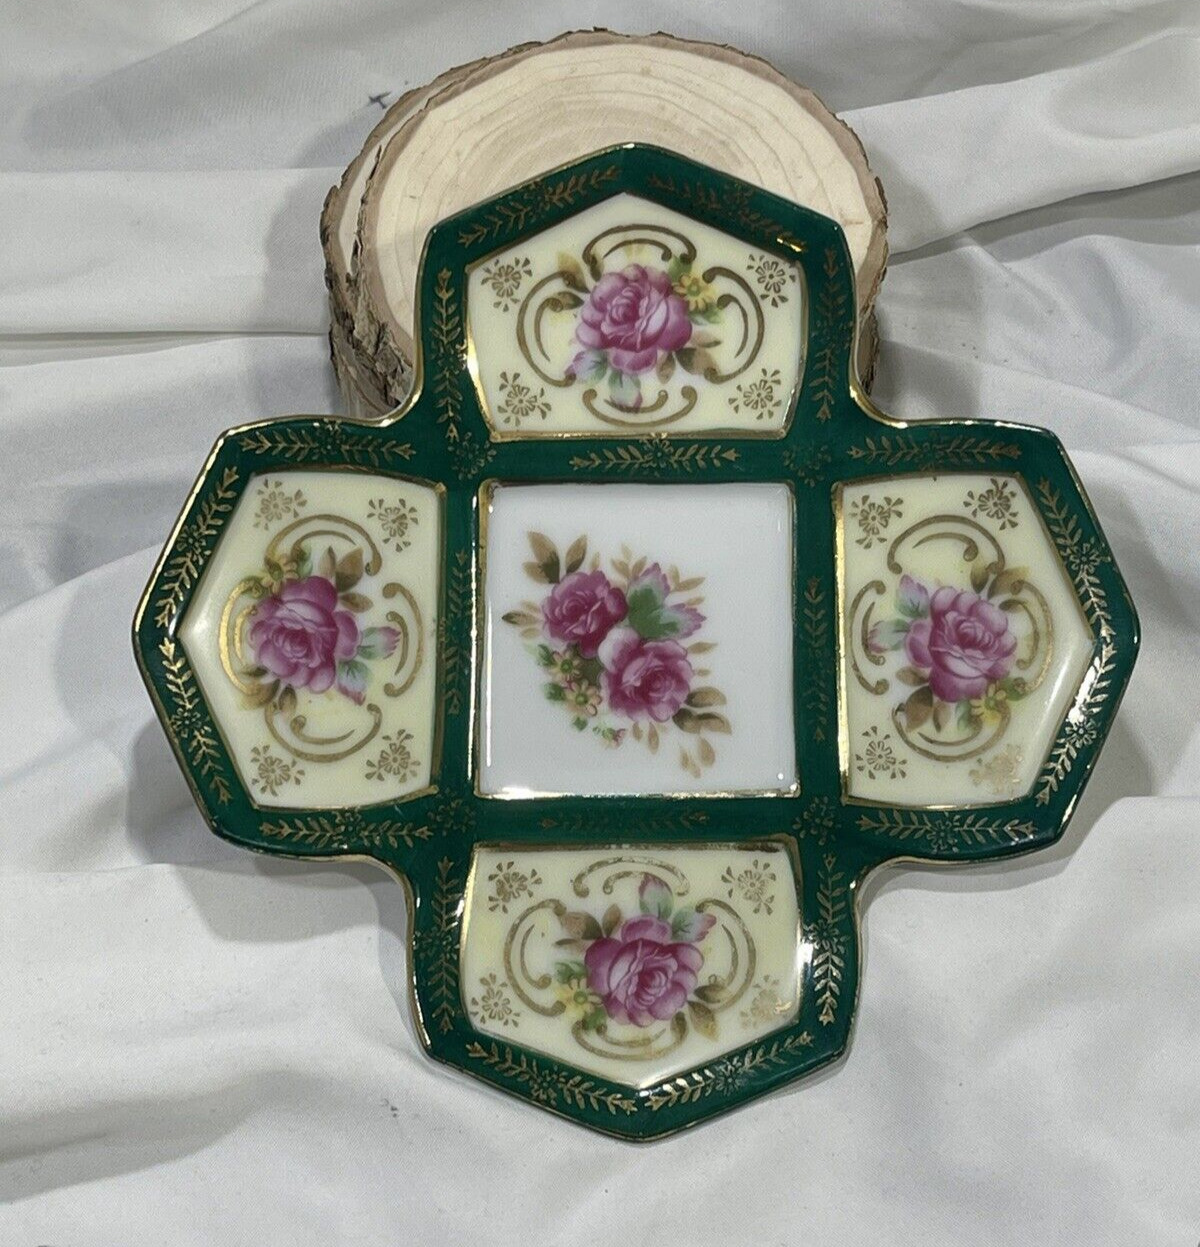 Vintage Royal Sealy China Green Cross Type Plate Saucer Trim w/ Pink Roses &Gold